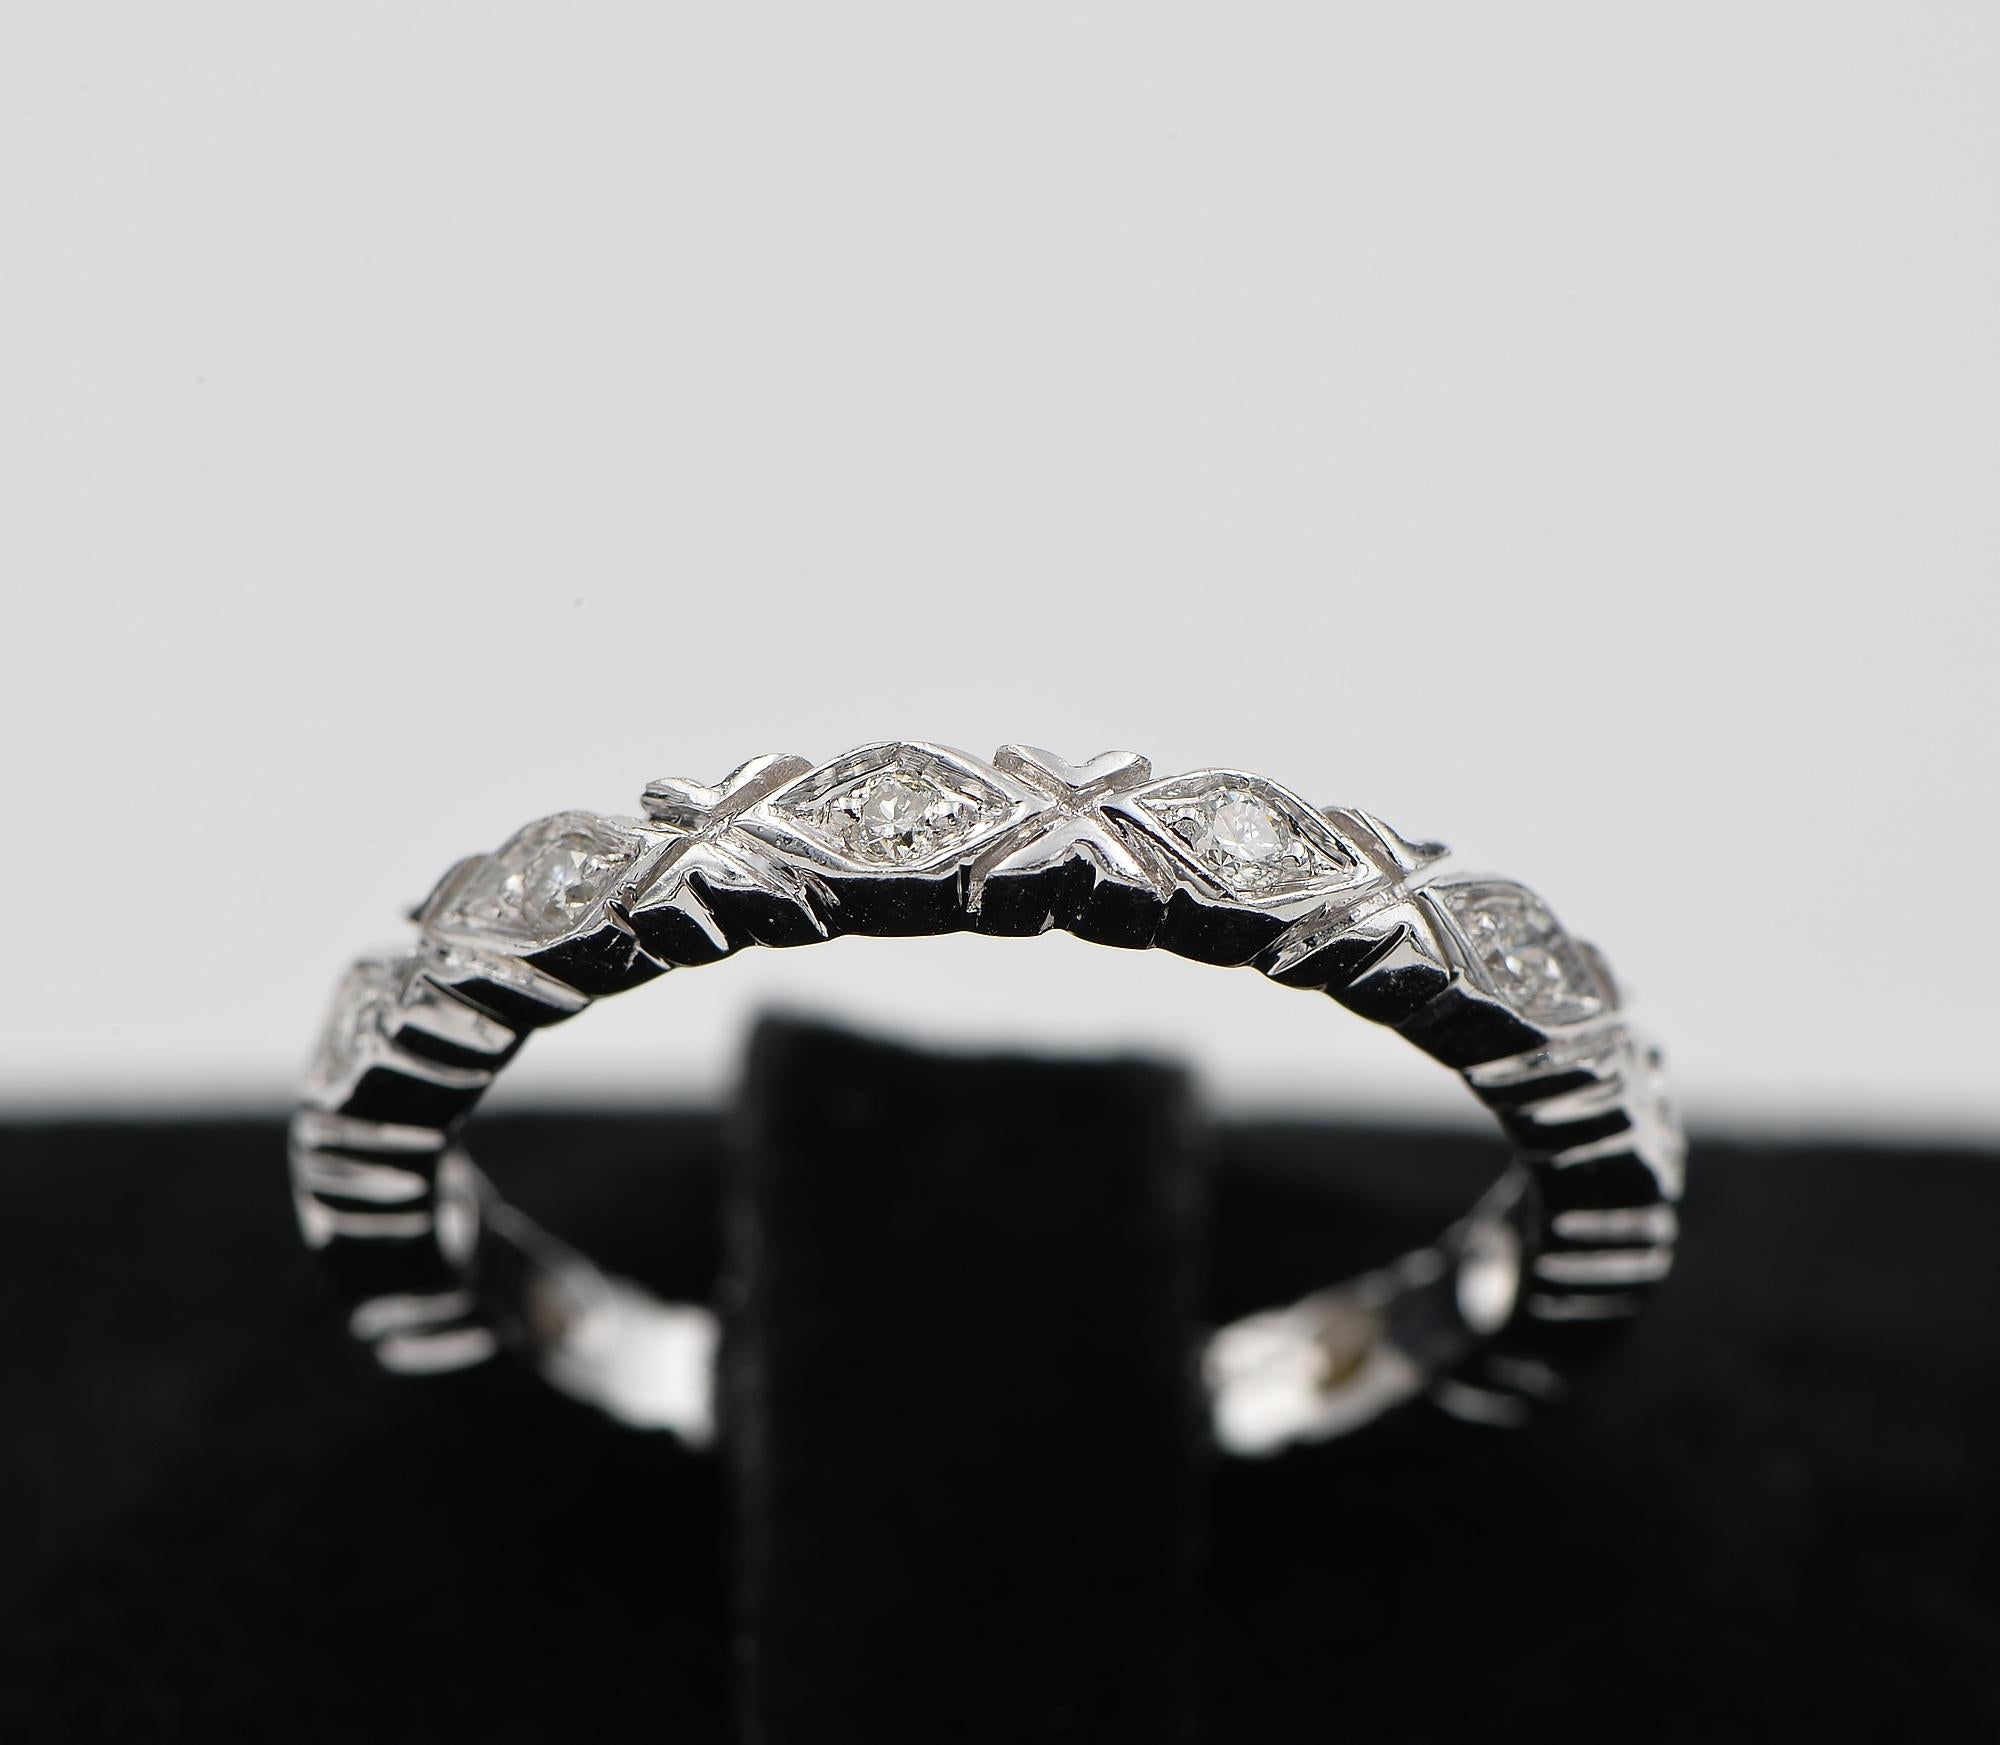 This very pretty full eternity ring is 1945 ca
Hand created of solid 18 KT gold with gorgeous engraving motifs, highlighted by .50 CT of round brilliant cut Diamonds G VS/SI - width is 2.5 mm. with 3.7 grams gross weight
Crisp and fine condition